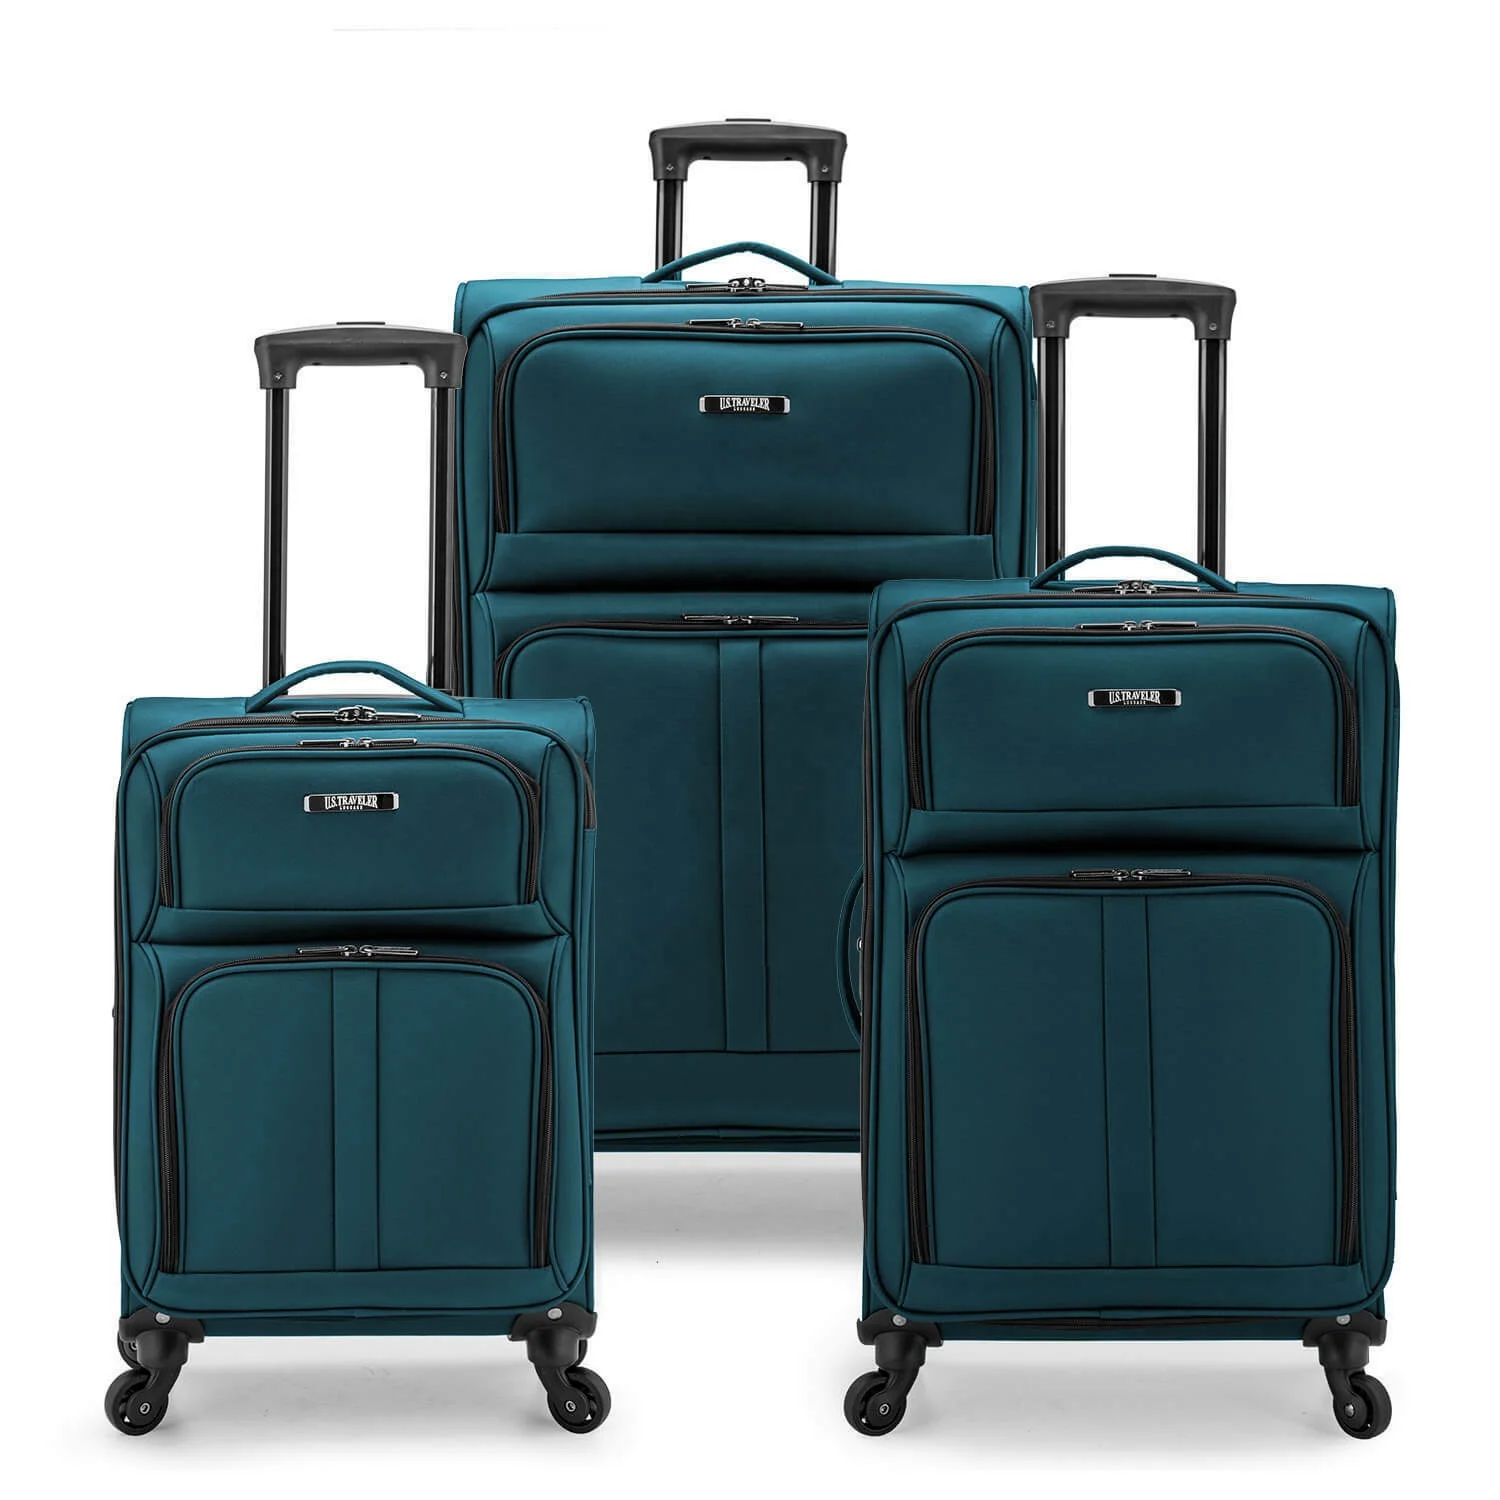 

Ultralight light Oxford luggage travel suitcase 3pc sets EVA luggage bag 360 steering wheel trolley luggage sets nylon suitcase, Navy/gray/teal/red